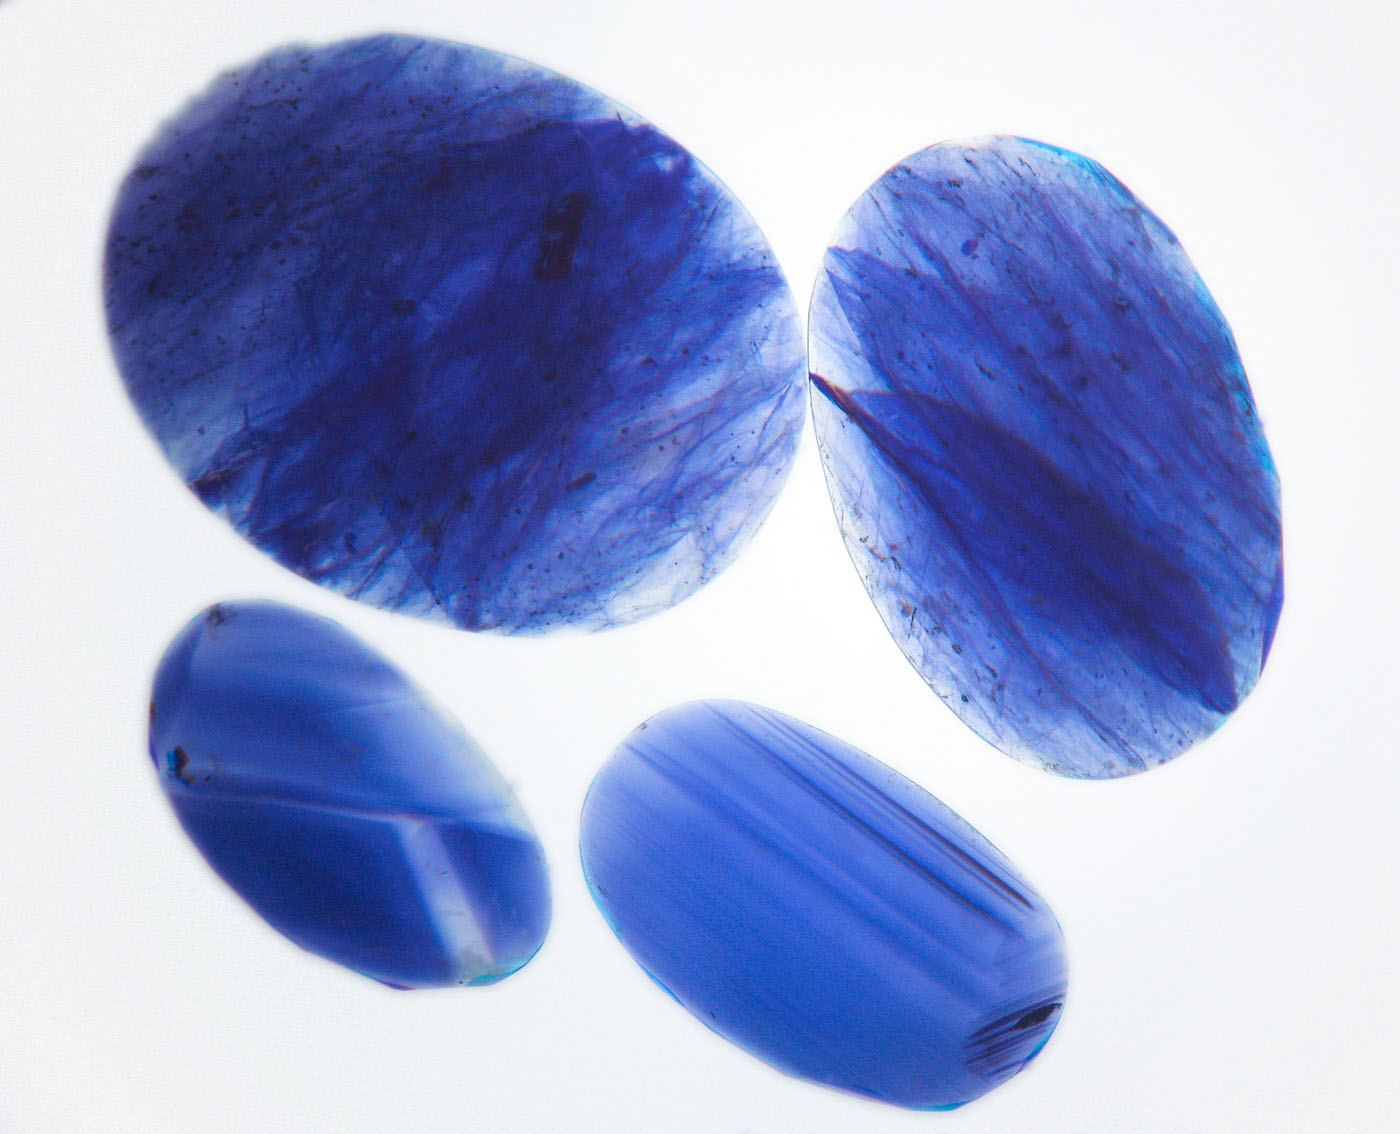 Figure 12. Immersion in di-iodomethane (methylene iodide) in diffuse light-field illumination quickly reveals the blue color concentrations in the cobalt-glass filled sapphires (top two stones), whereas natural sapphires show angular color zoning (lower two stones). Image corrected to remove yellow color of liquid. (Photo: Wimon Manorotkul, Lotus Gemology).